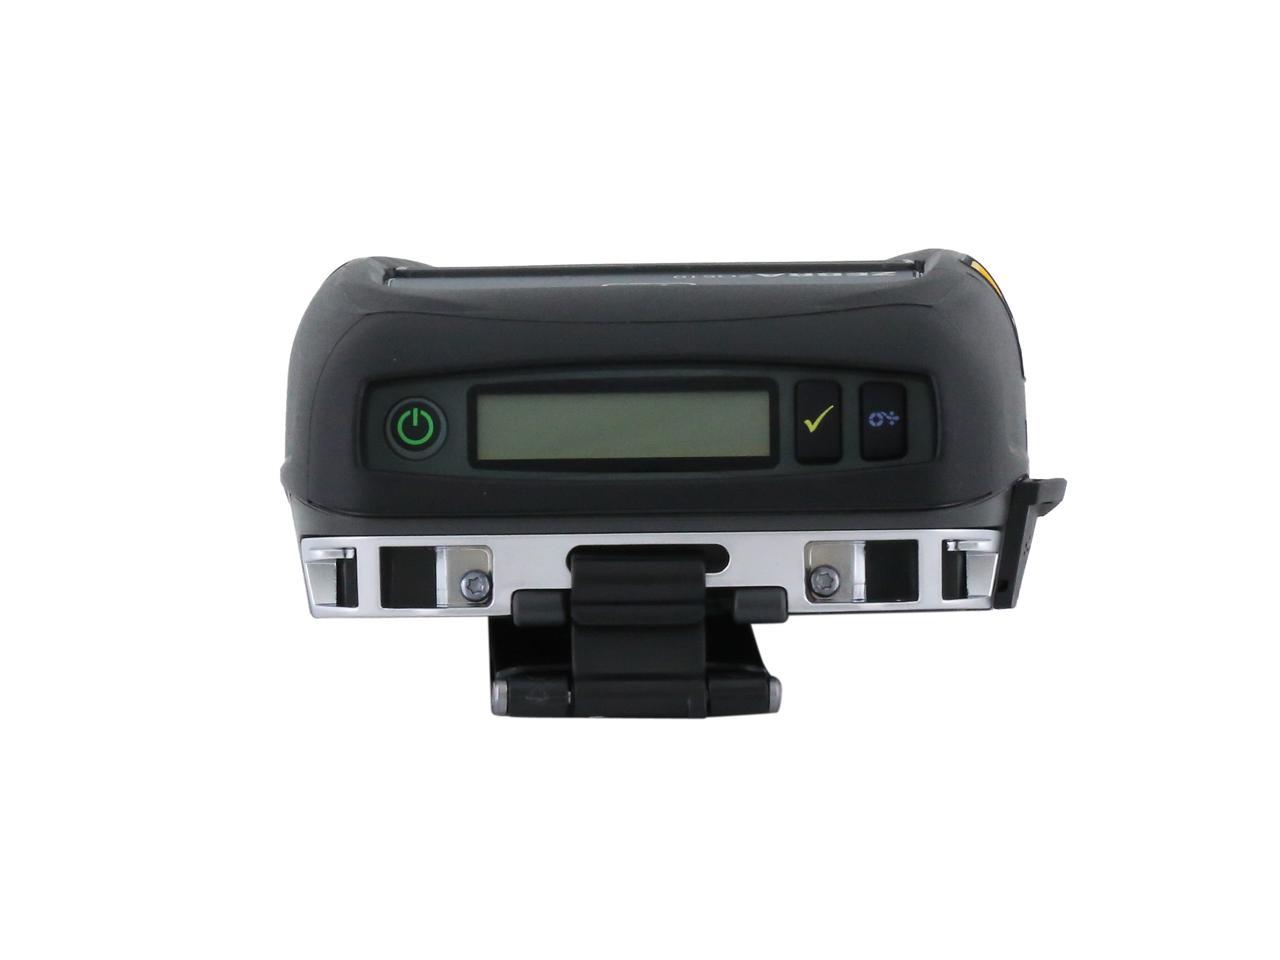 Zebra Zq510 3 Mobile Direct Thermal Receipt And Label Printer 203 Dpi Bluetooth 40 Linered 6477